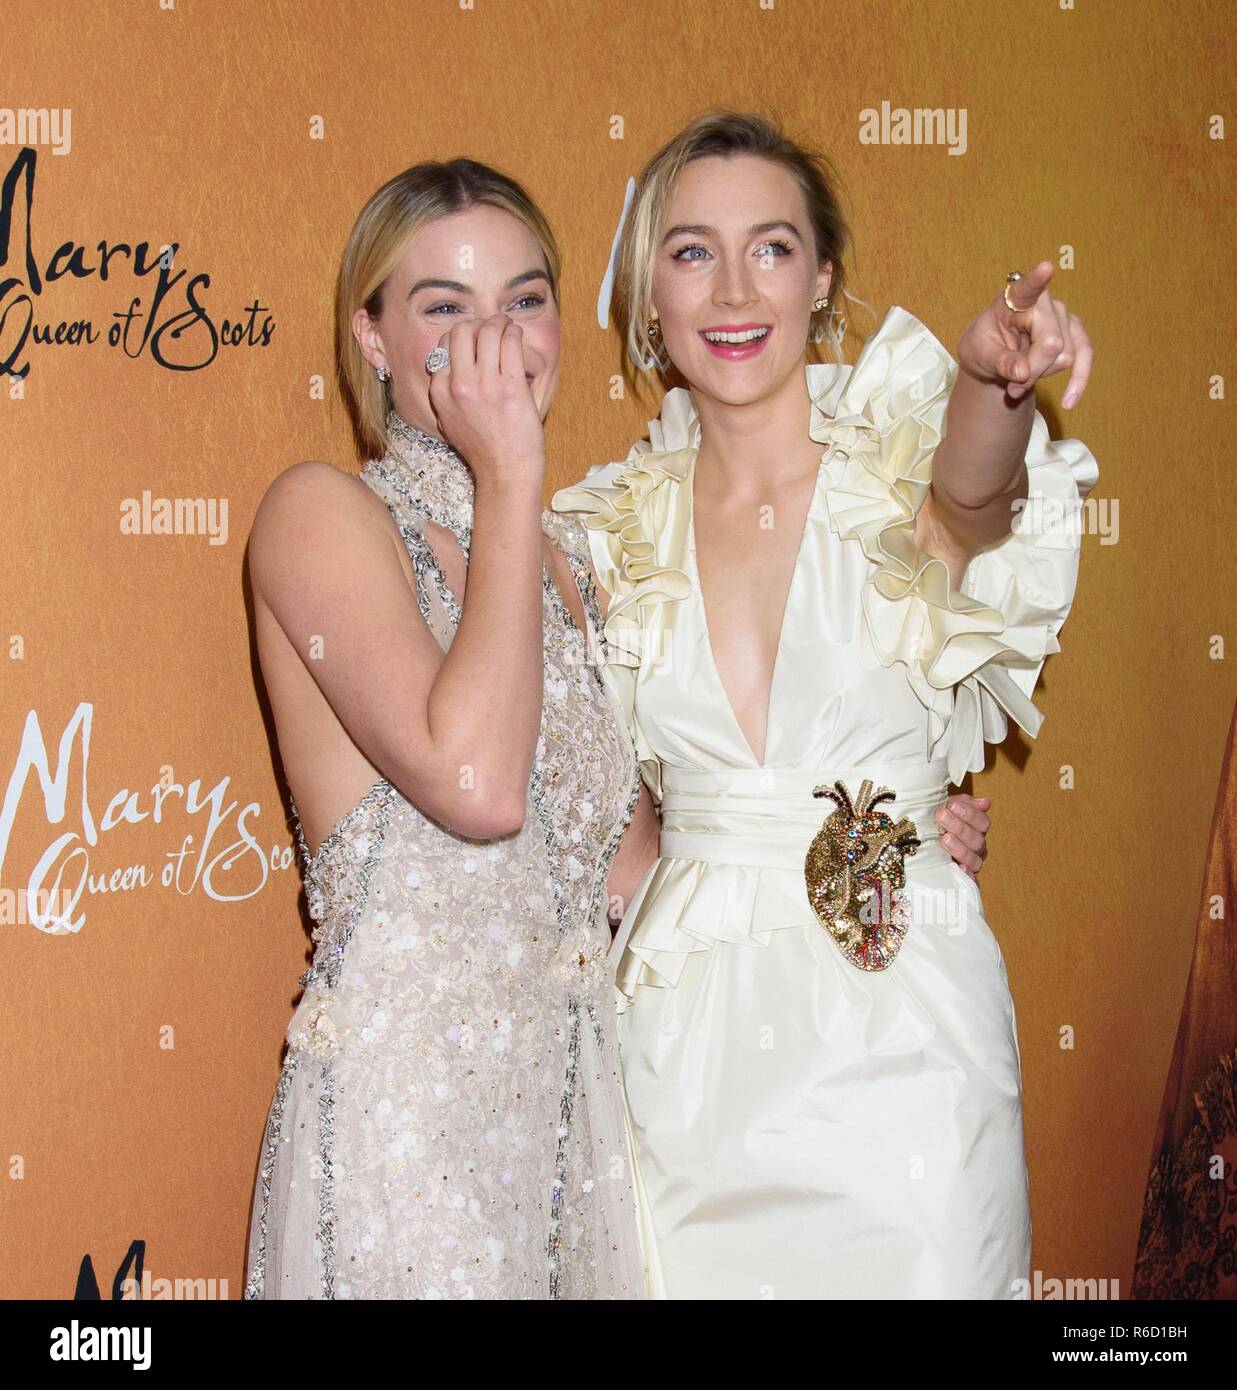 New York, NY, USA. 4th Dec, 2018. Margot Robbie, Saoirse Ronan at arrivals for MARY QUEEN OF SCOTS Premiere, The Paris Theater, New York, NY December 4, 2018. Credit: RCF/Everett Collection/Alamy Live News Stock Photo